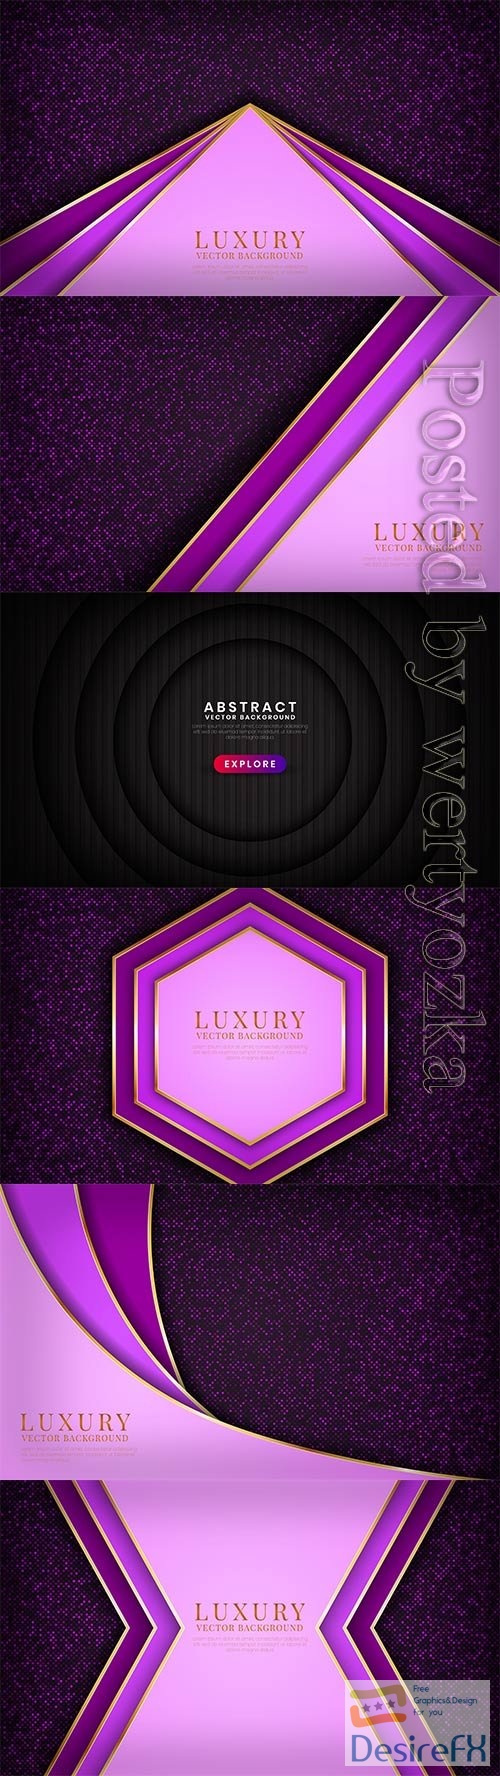 Abstract vector backgrounds with lilac design